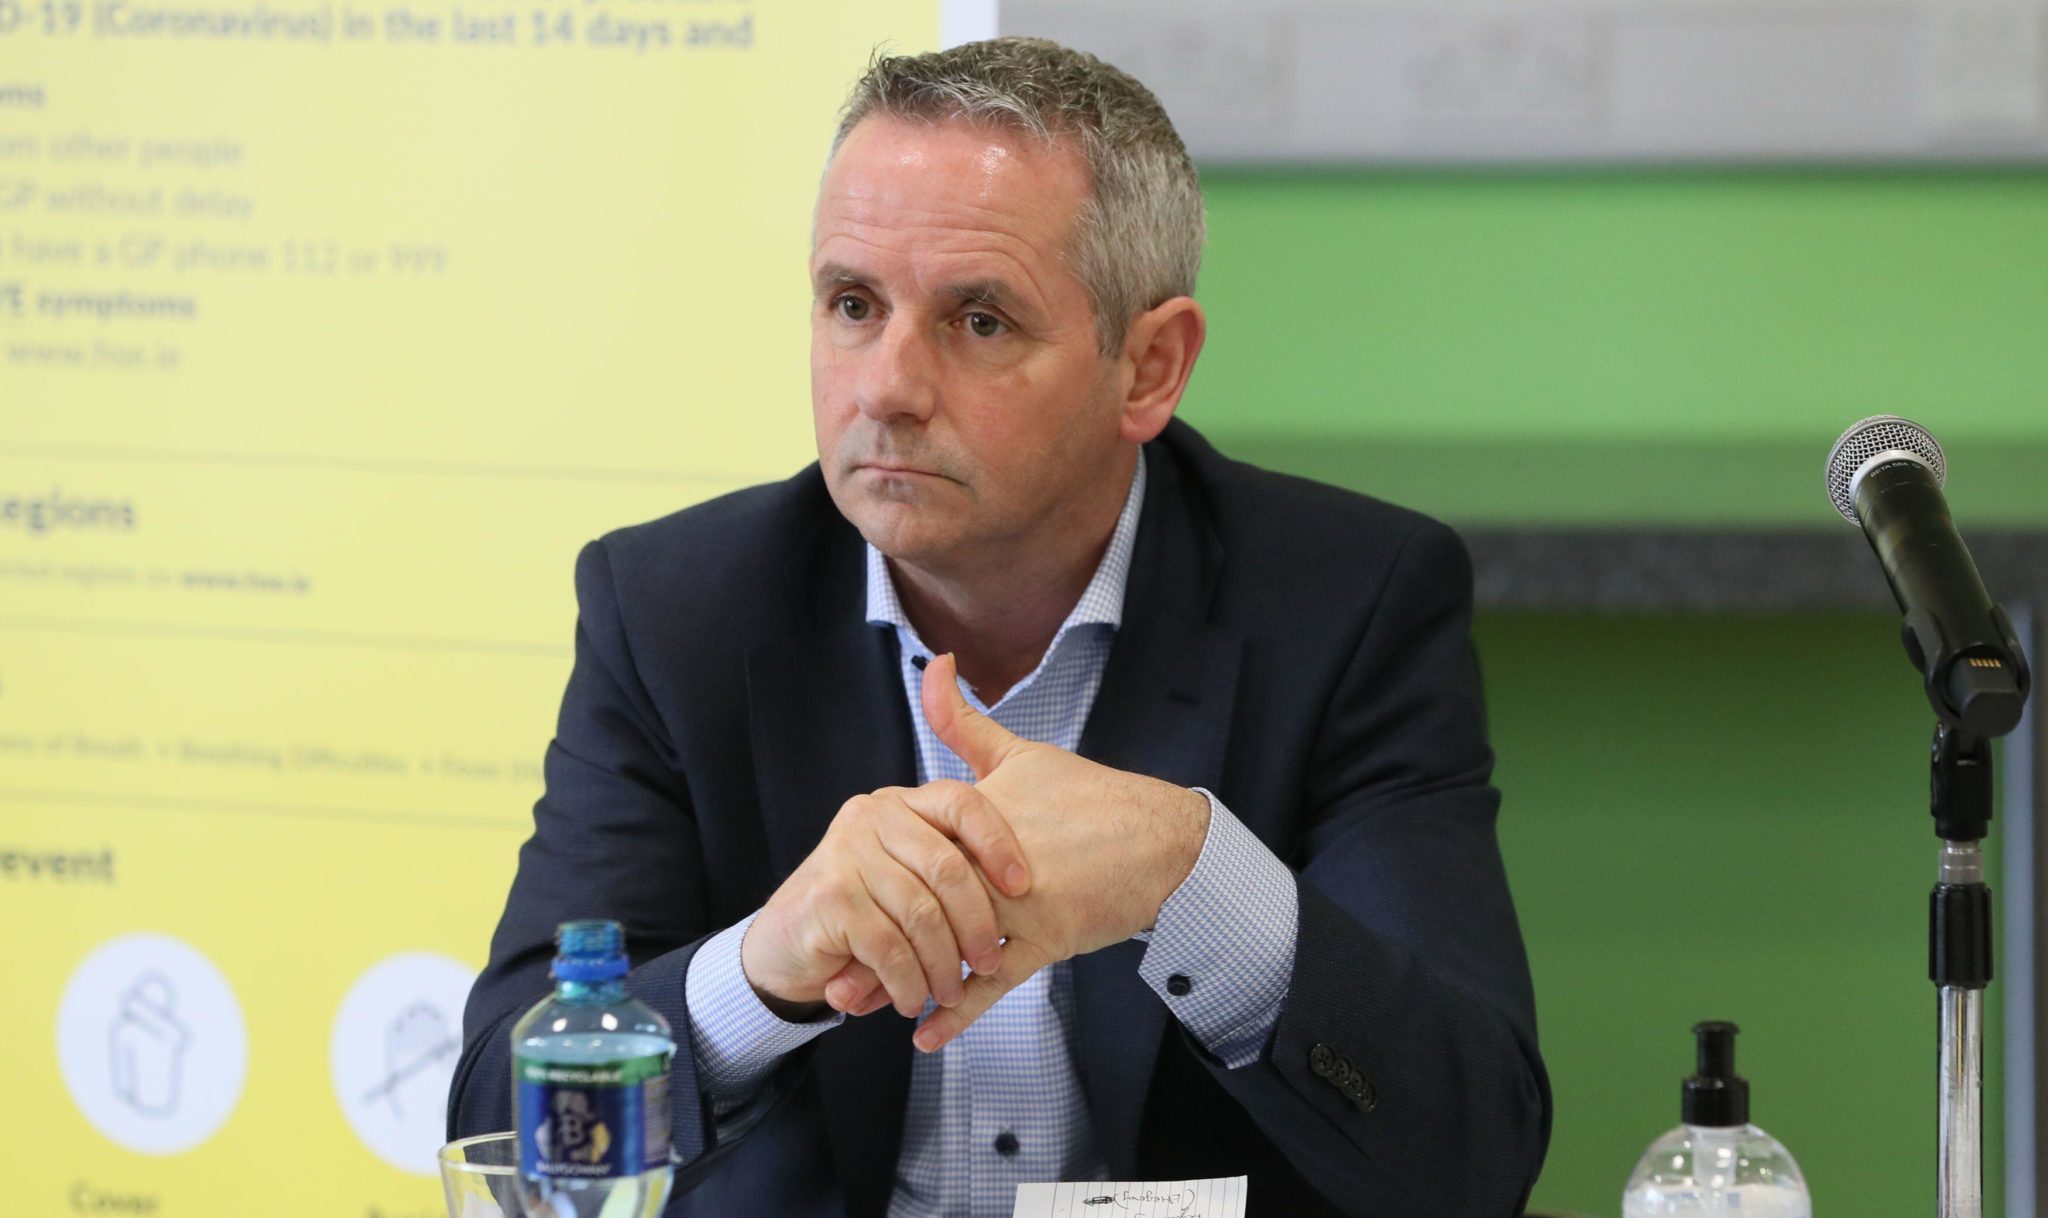 Paul Reid, CEO of the Health Service Executive (HSE), ahead of a briefing on coronavirus at Dr Steevens' Hospital, Dublin in March 2020.